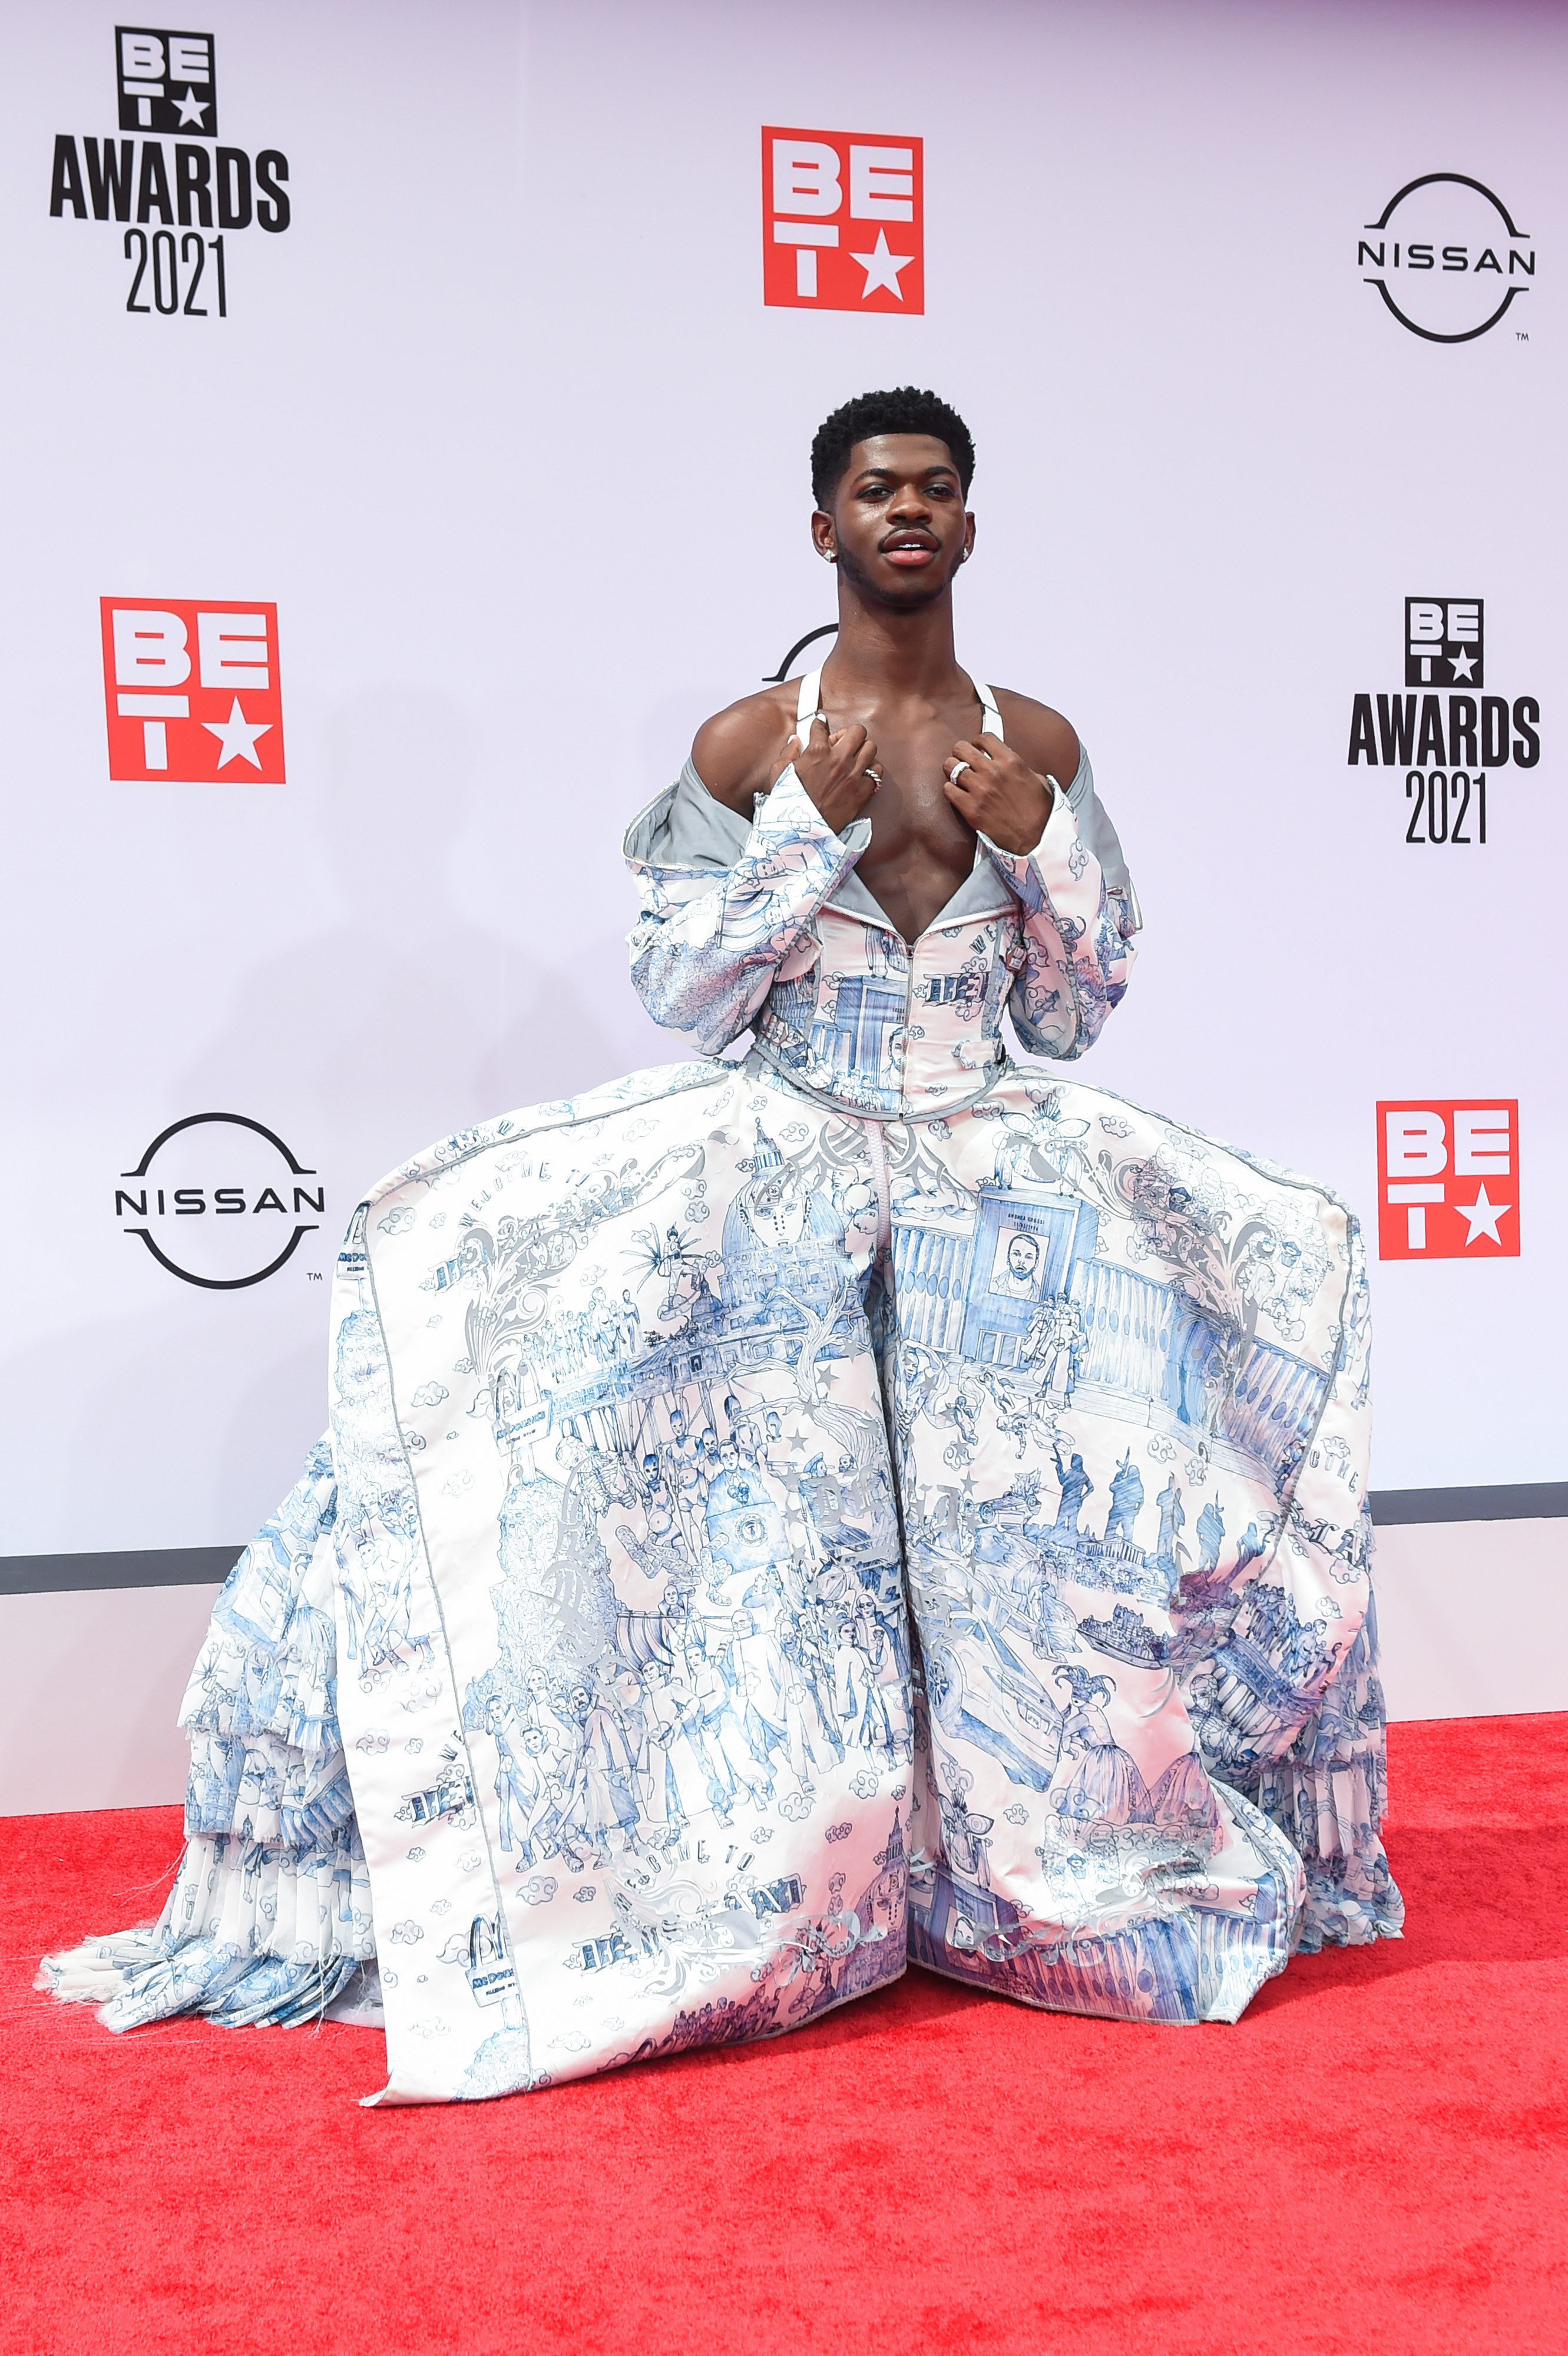 Recording Lil Nas X attends the 2021 BET Awards at the Microsoft Theater on June 27, 2021 in Los Angeles, California